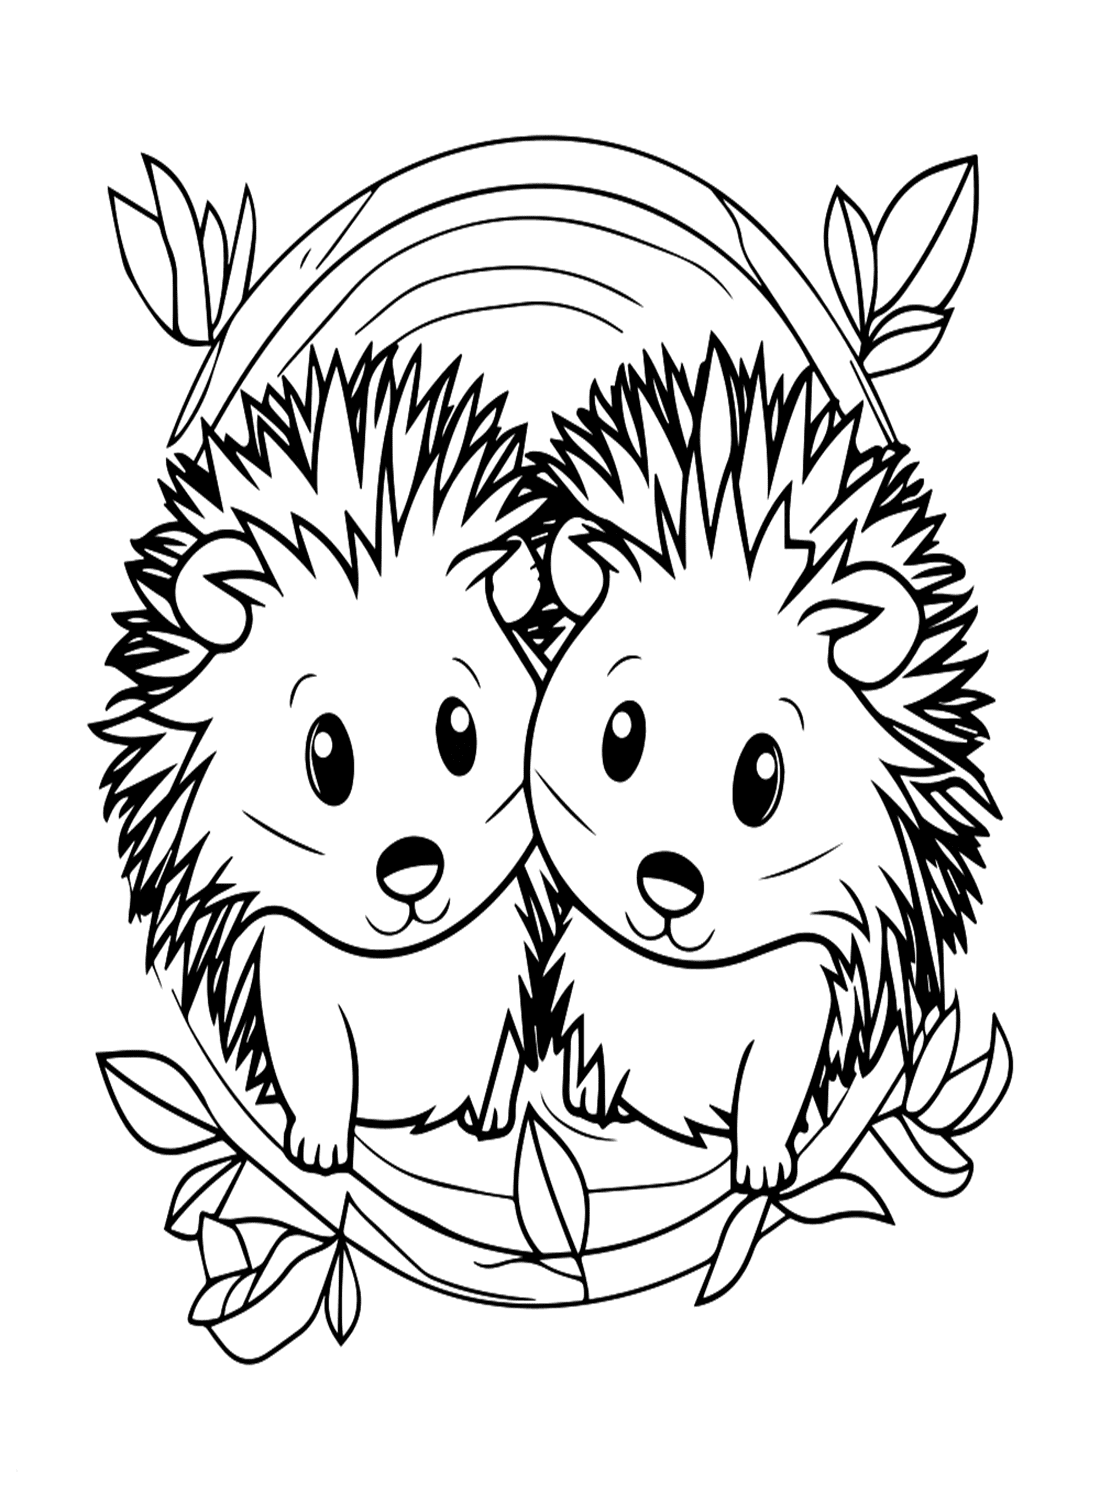 Couple Porcupine Coloring Sheet from Porcupine